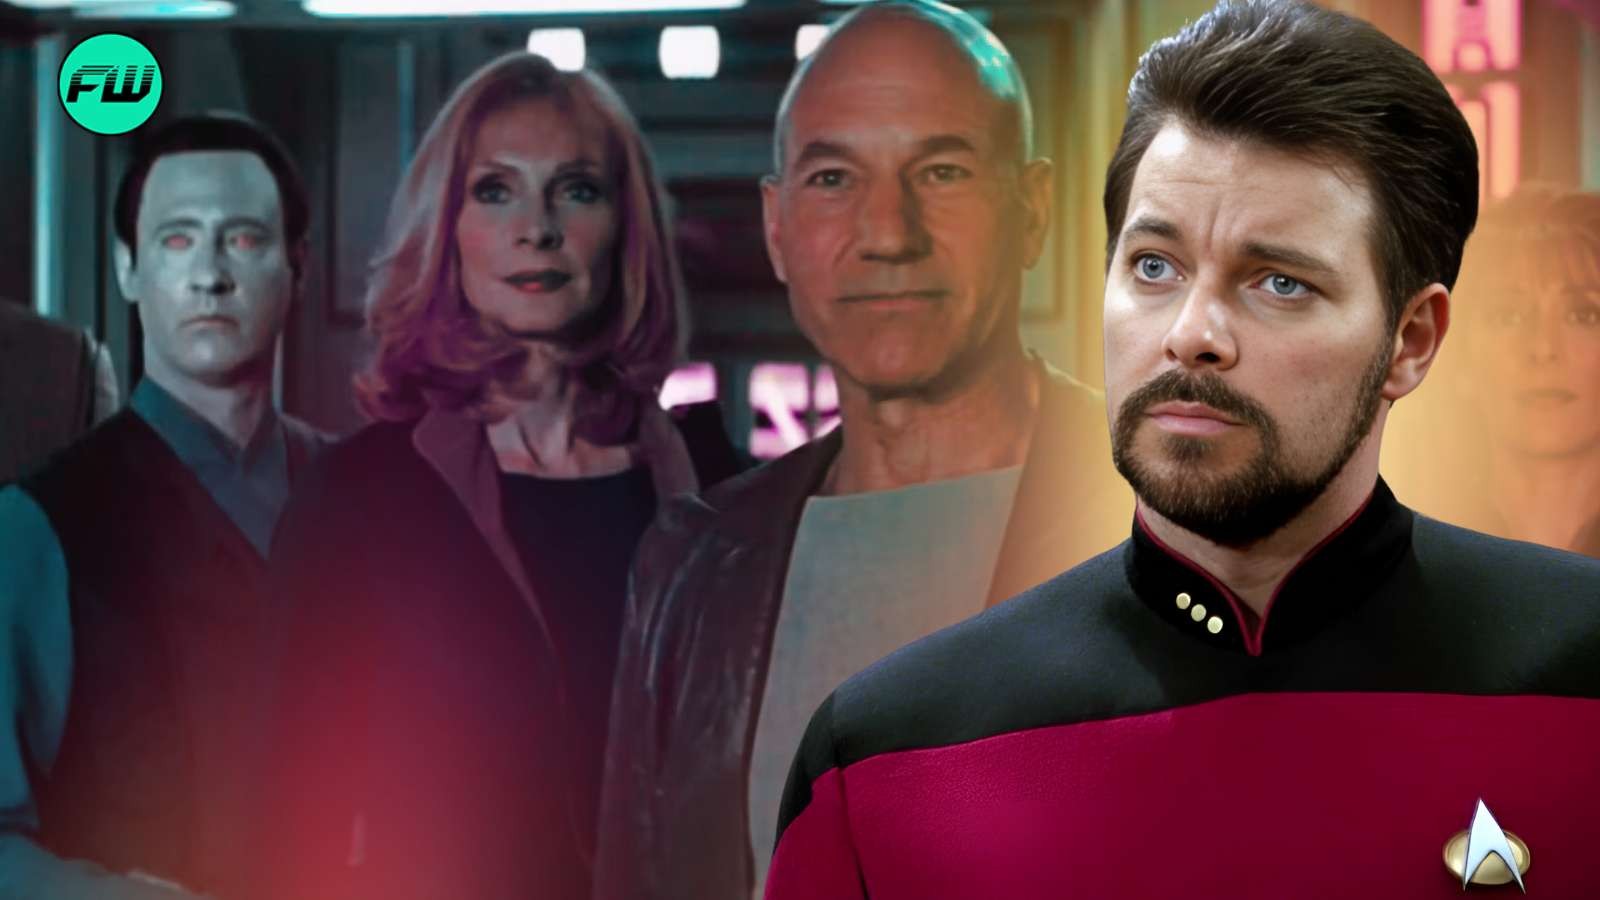 The studio was not happy with a Star Trek film directed by Next Generation star Jonathan Frakes